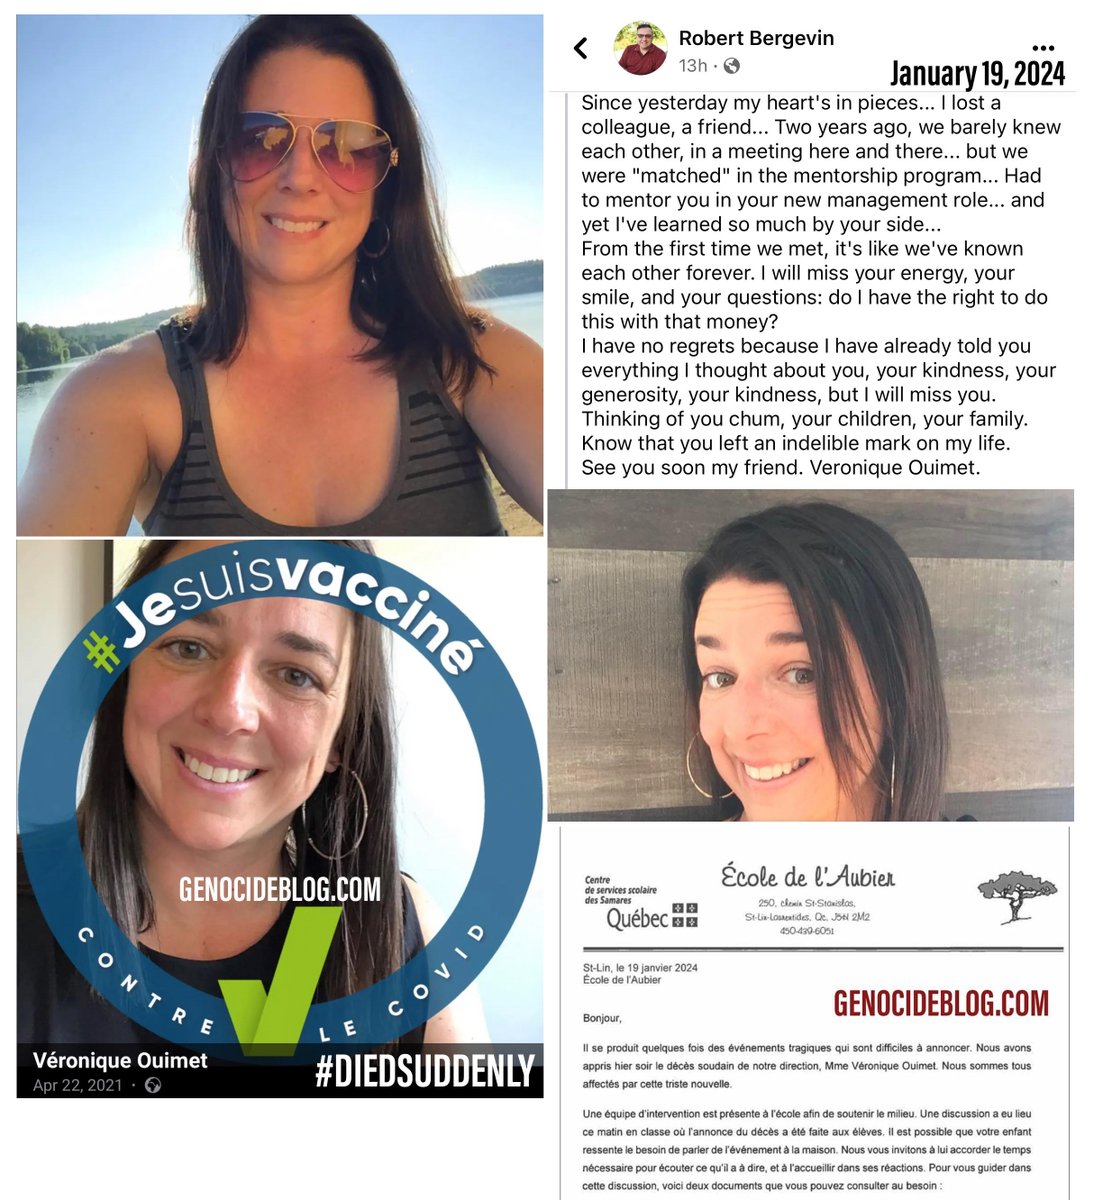 Quebec, Canada - 35 year old Veronique Ouimet worked as a manager at a French School in Quebec, Canada. She died suddenly on Jan.18, 2024. Apr.2021: 'Je suis Vaccine contre le COVID' COVID-19 mRNA Vaccine Sudden deaths are at all time highs, especially in mandated jobs…